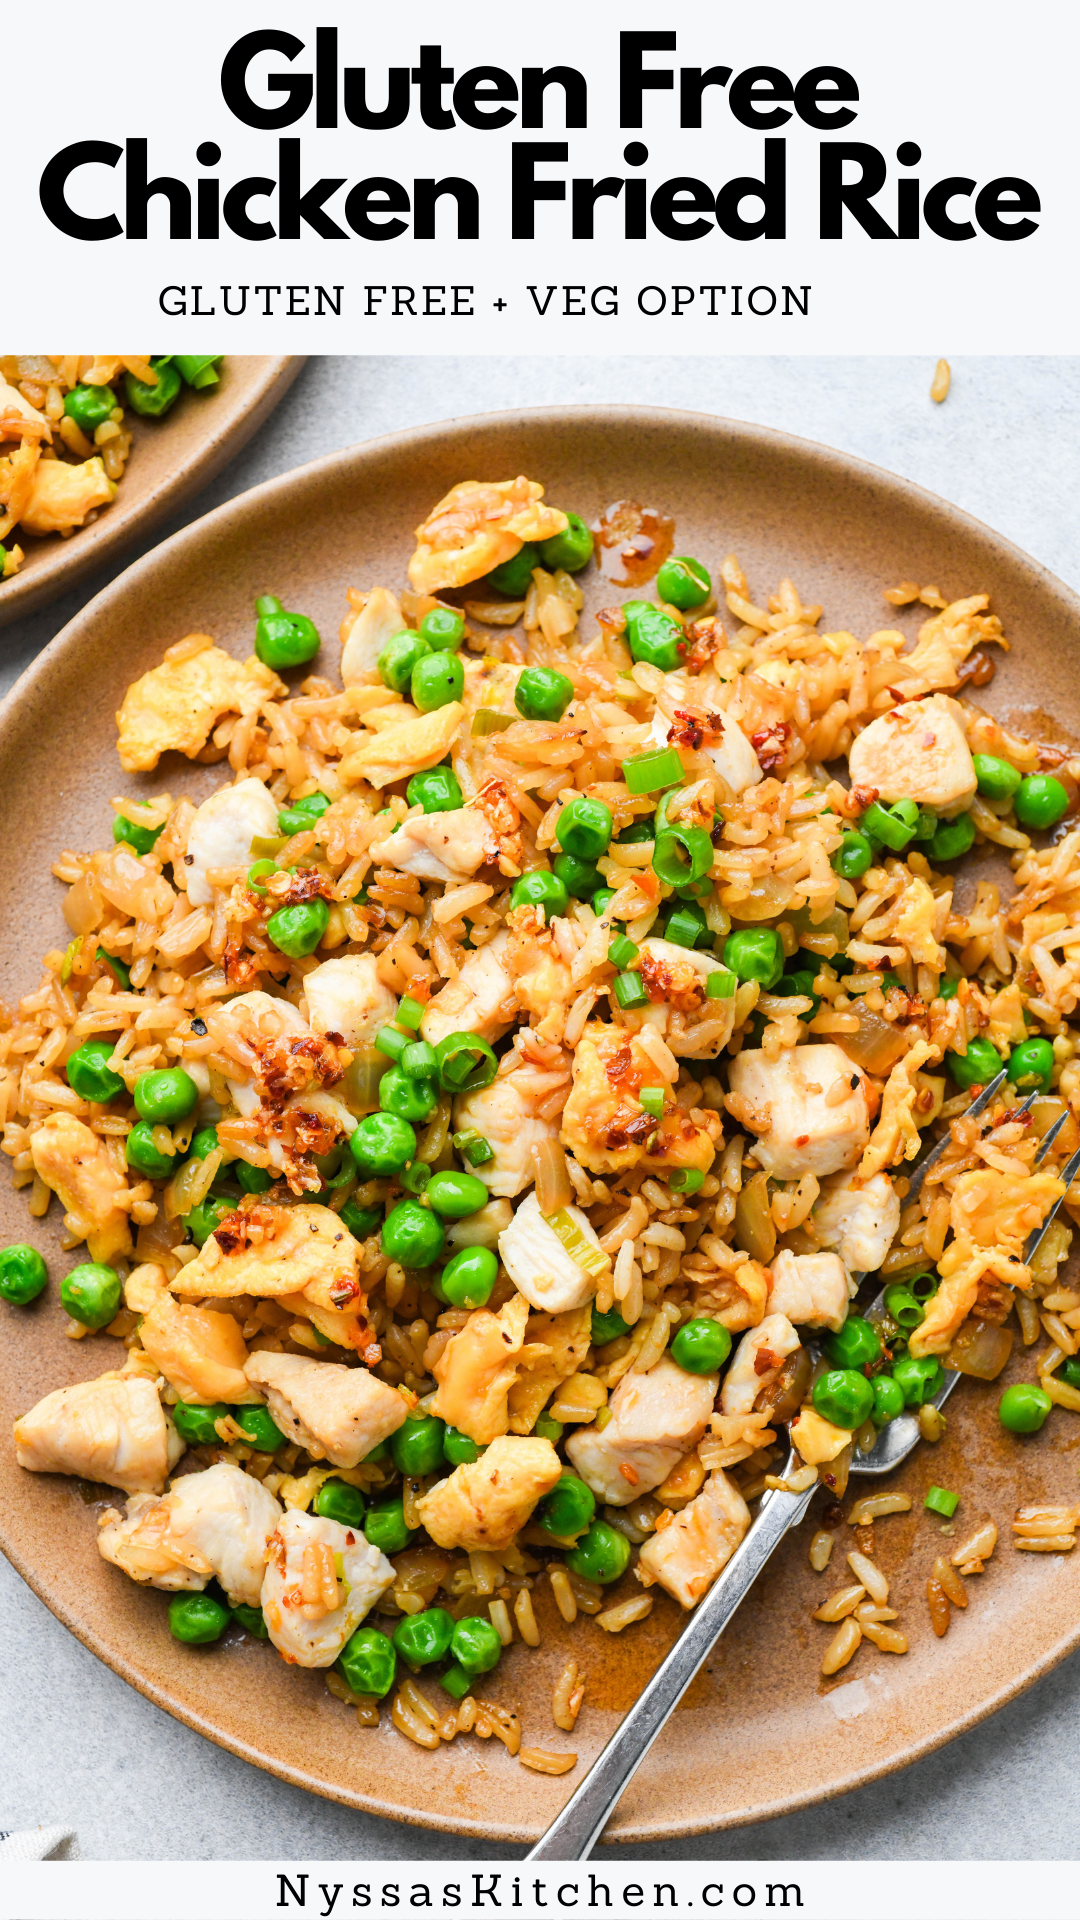 Gluten free chicken fried rice - a truly delicious (& easy!) recipe for fried rice that is arguably better than takeout. Crispy, perfectly seasoned rice, scrambled eggs, sweet peas, and green onions bring this dish to life for a dinner that the whole family will love! Gluten free, soy free option, vegetarian option.